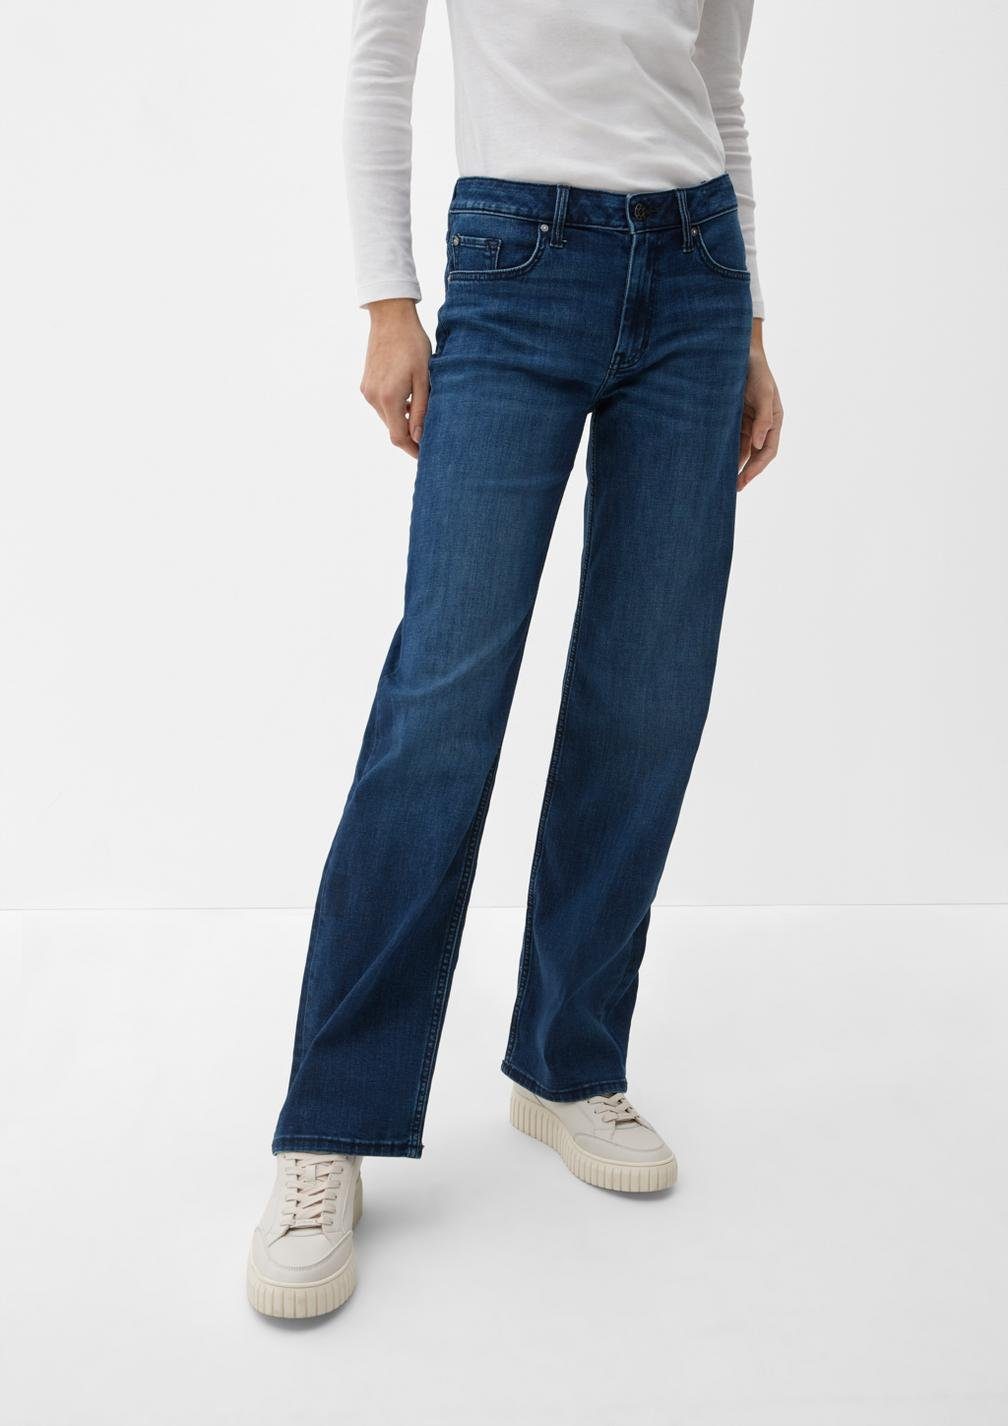 s.Oliver Comfort-fit-Jeans KAROLIN / mit Relaxed tiefblau Straight rise Leg / Fit Waschung, Mid leichter